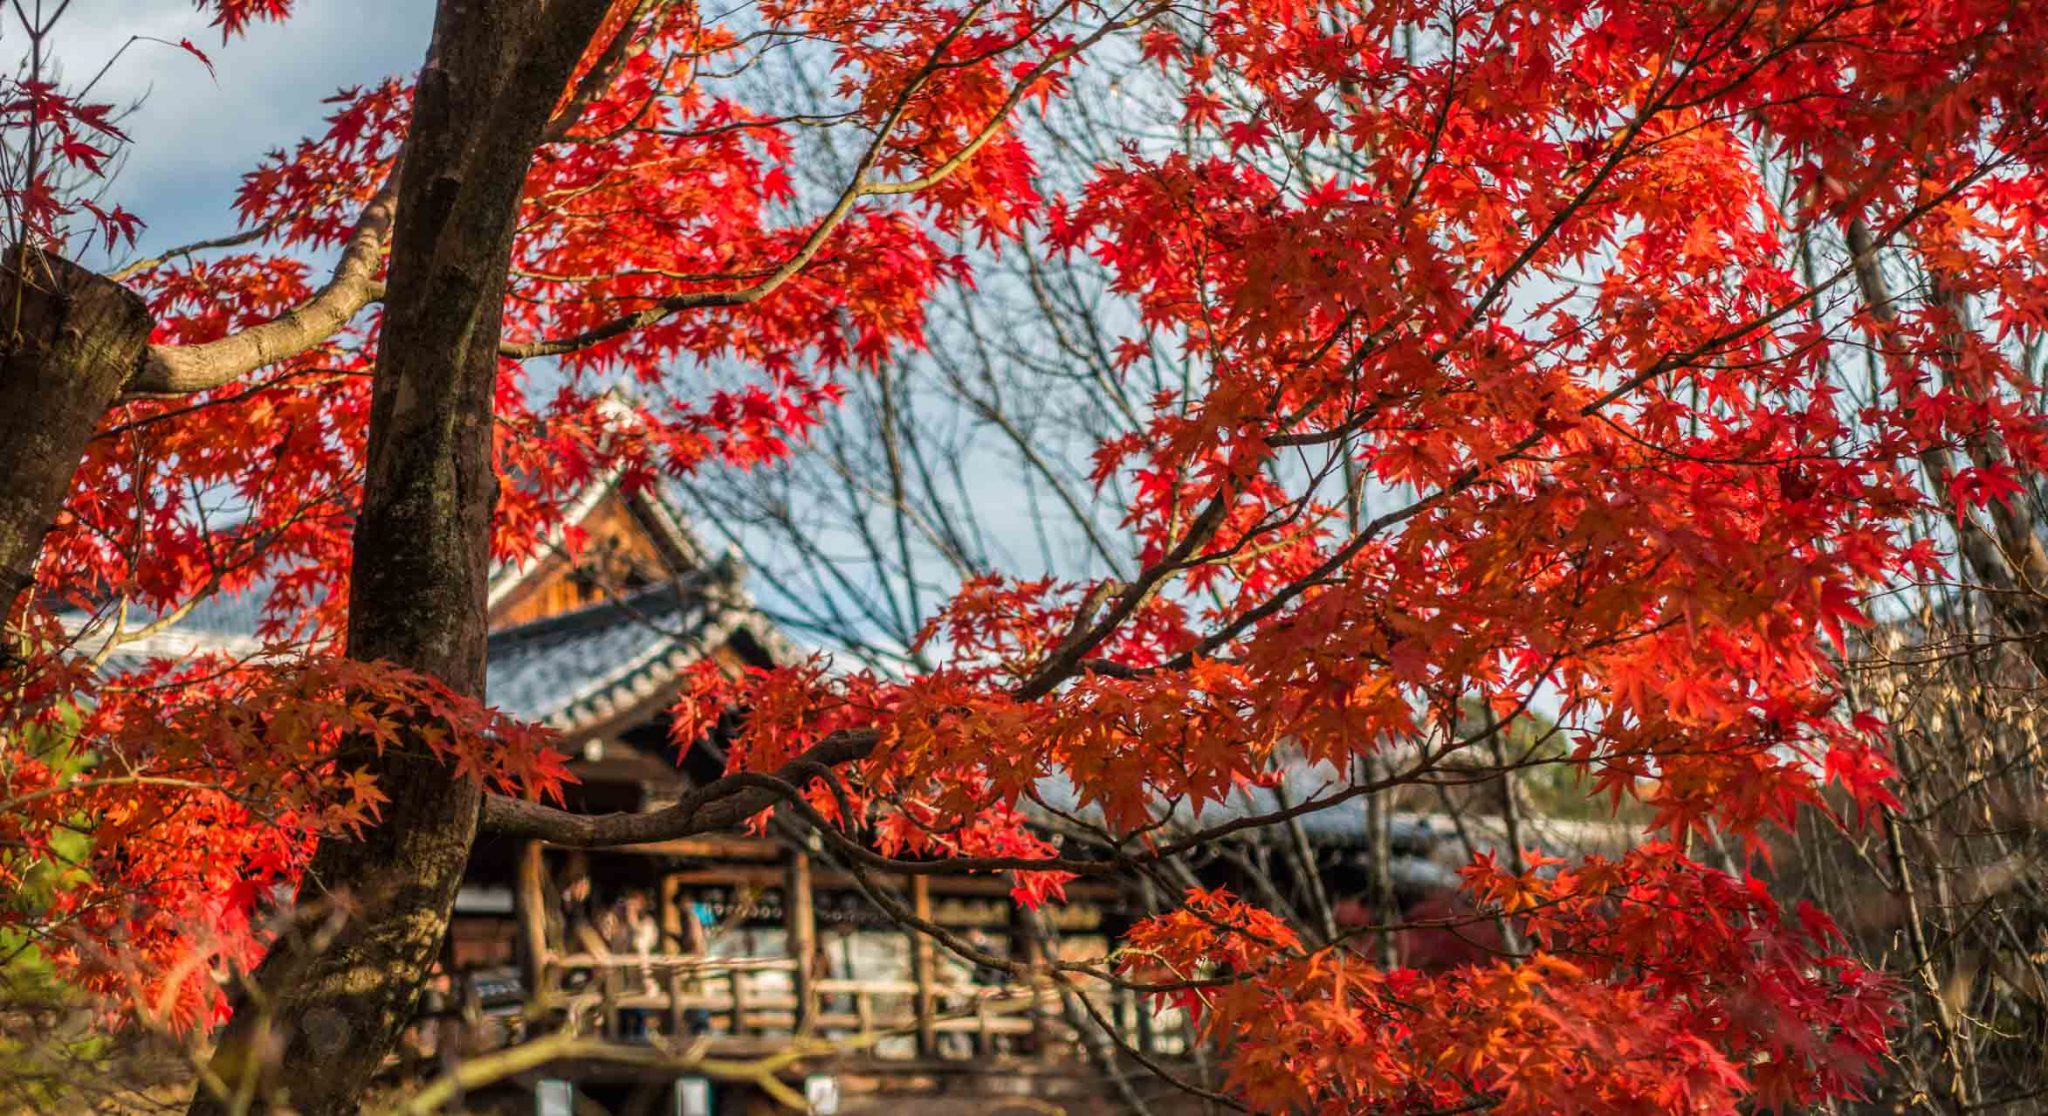 The 10 Best Autumn Leaves Spots In Kyoto You Should Definitely Visit!